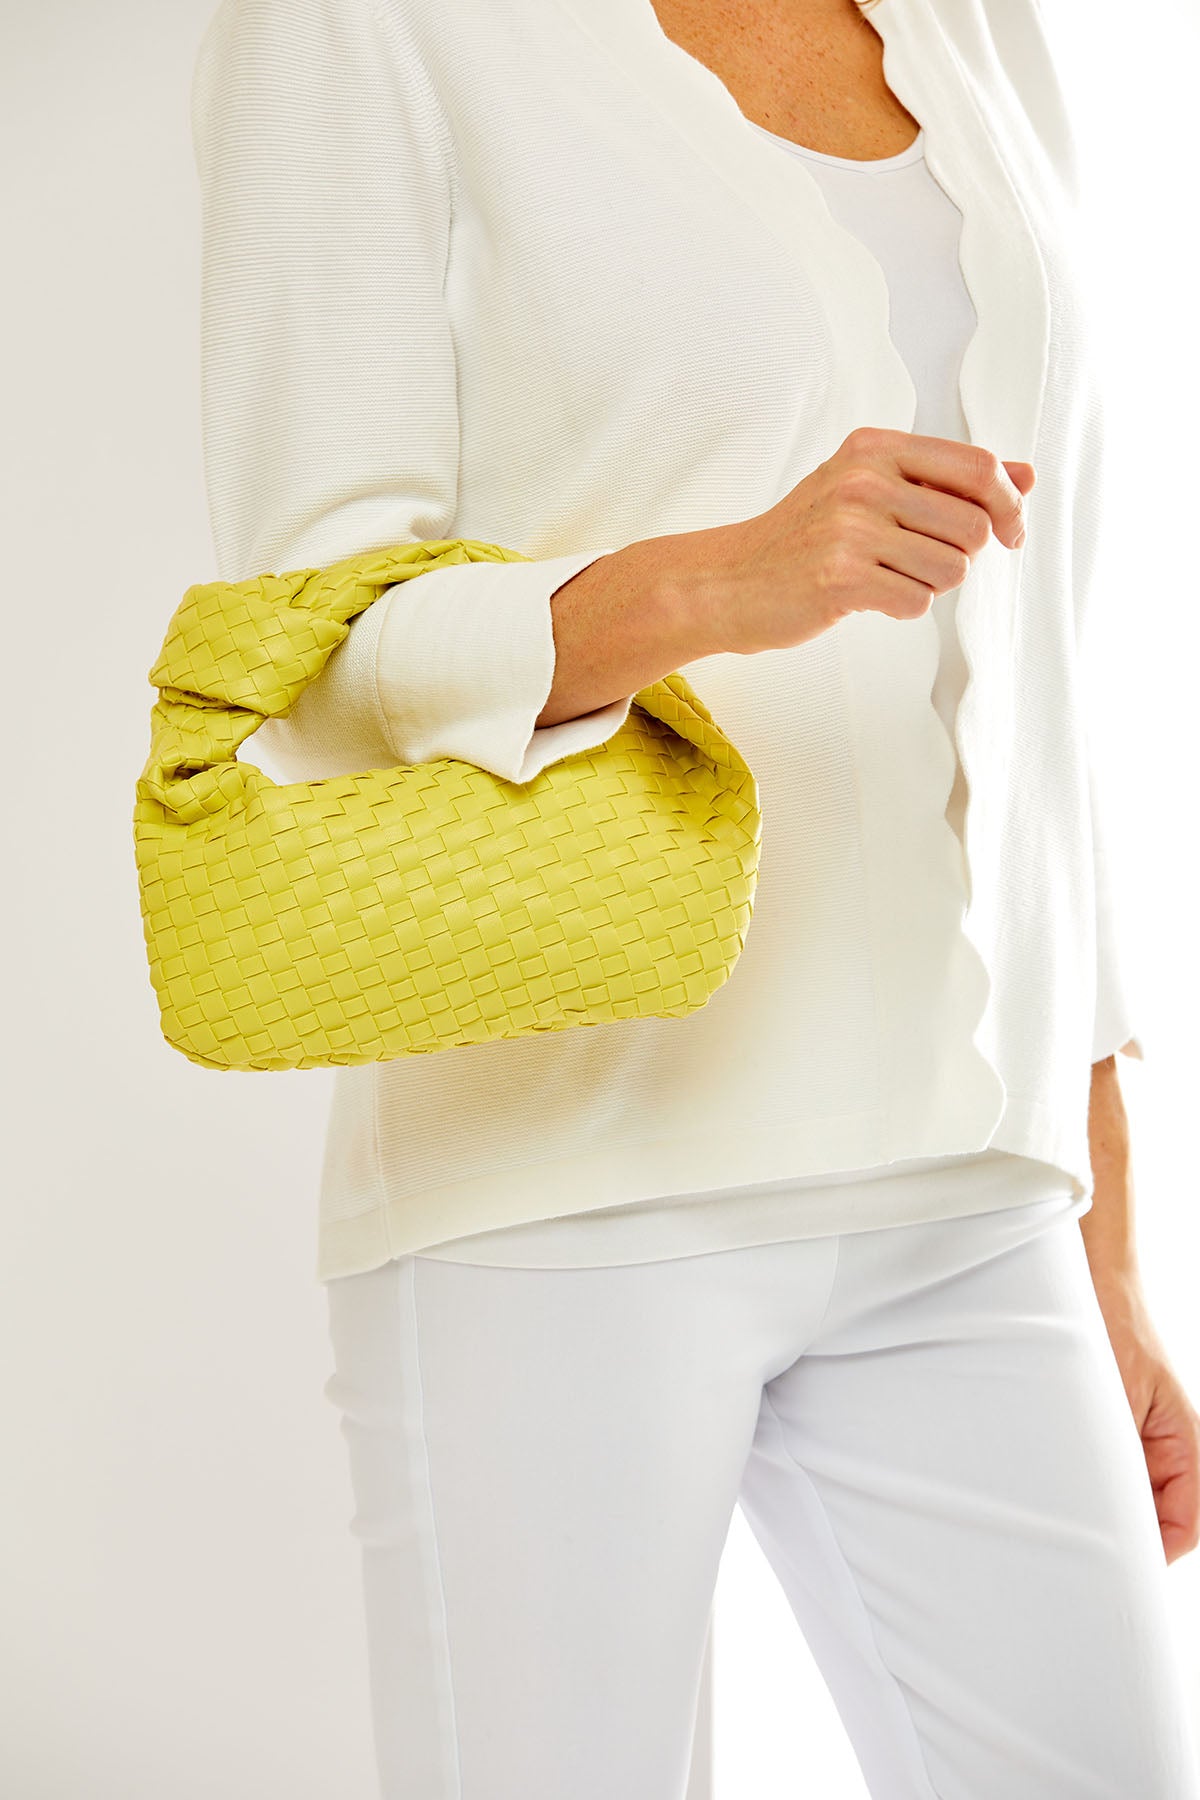 Woman holding a yellow bag